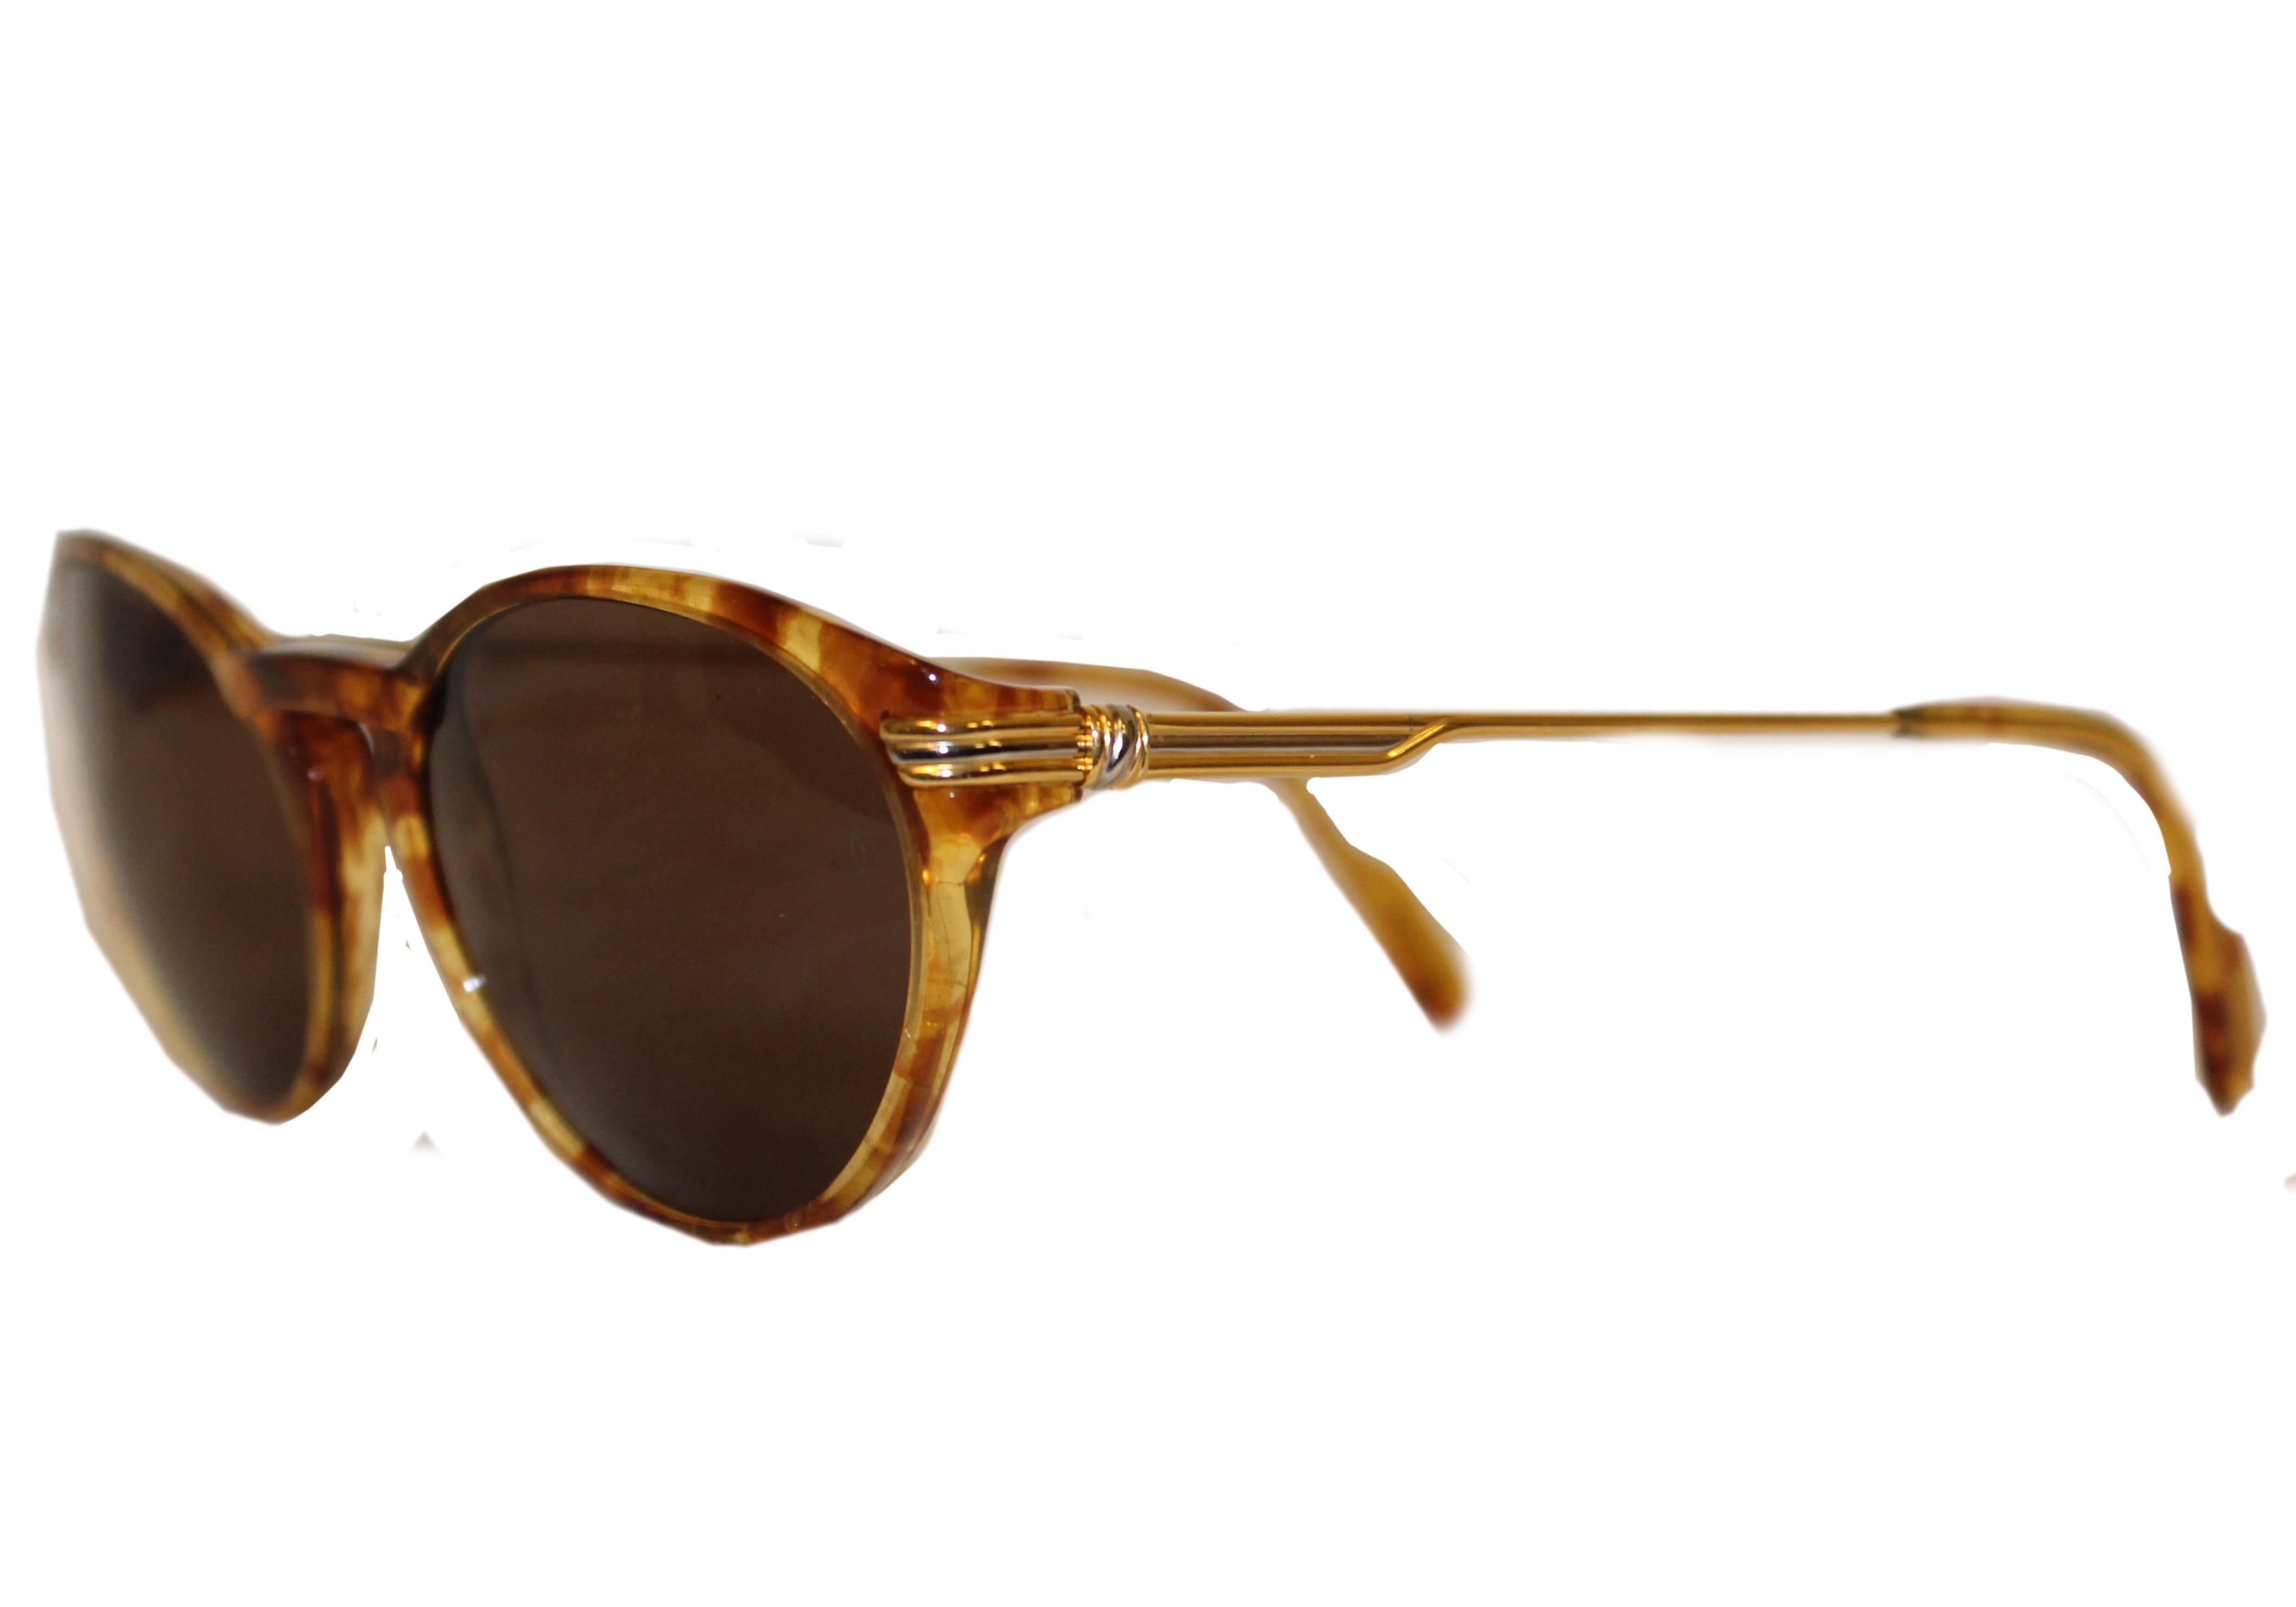 Cartier Cat Eye tortoise shell motif sunglasses with 135 mm temples and gold tone metal details on temples and hinges.  A Cartier logo plaque is featured at the end of each temple.   The Cartier work has stood the test of time and every woman, no